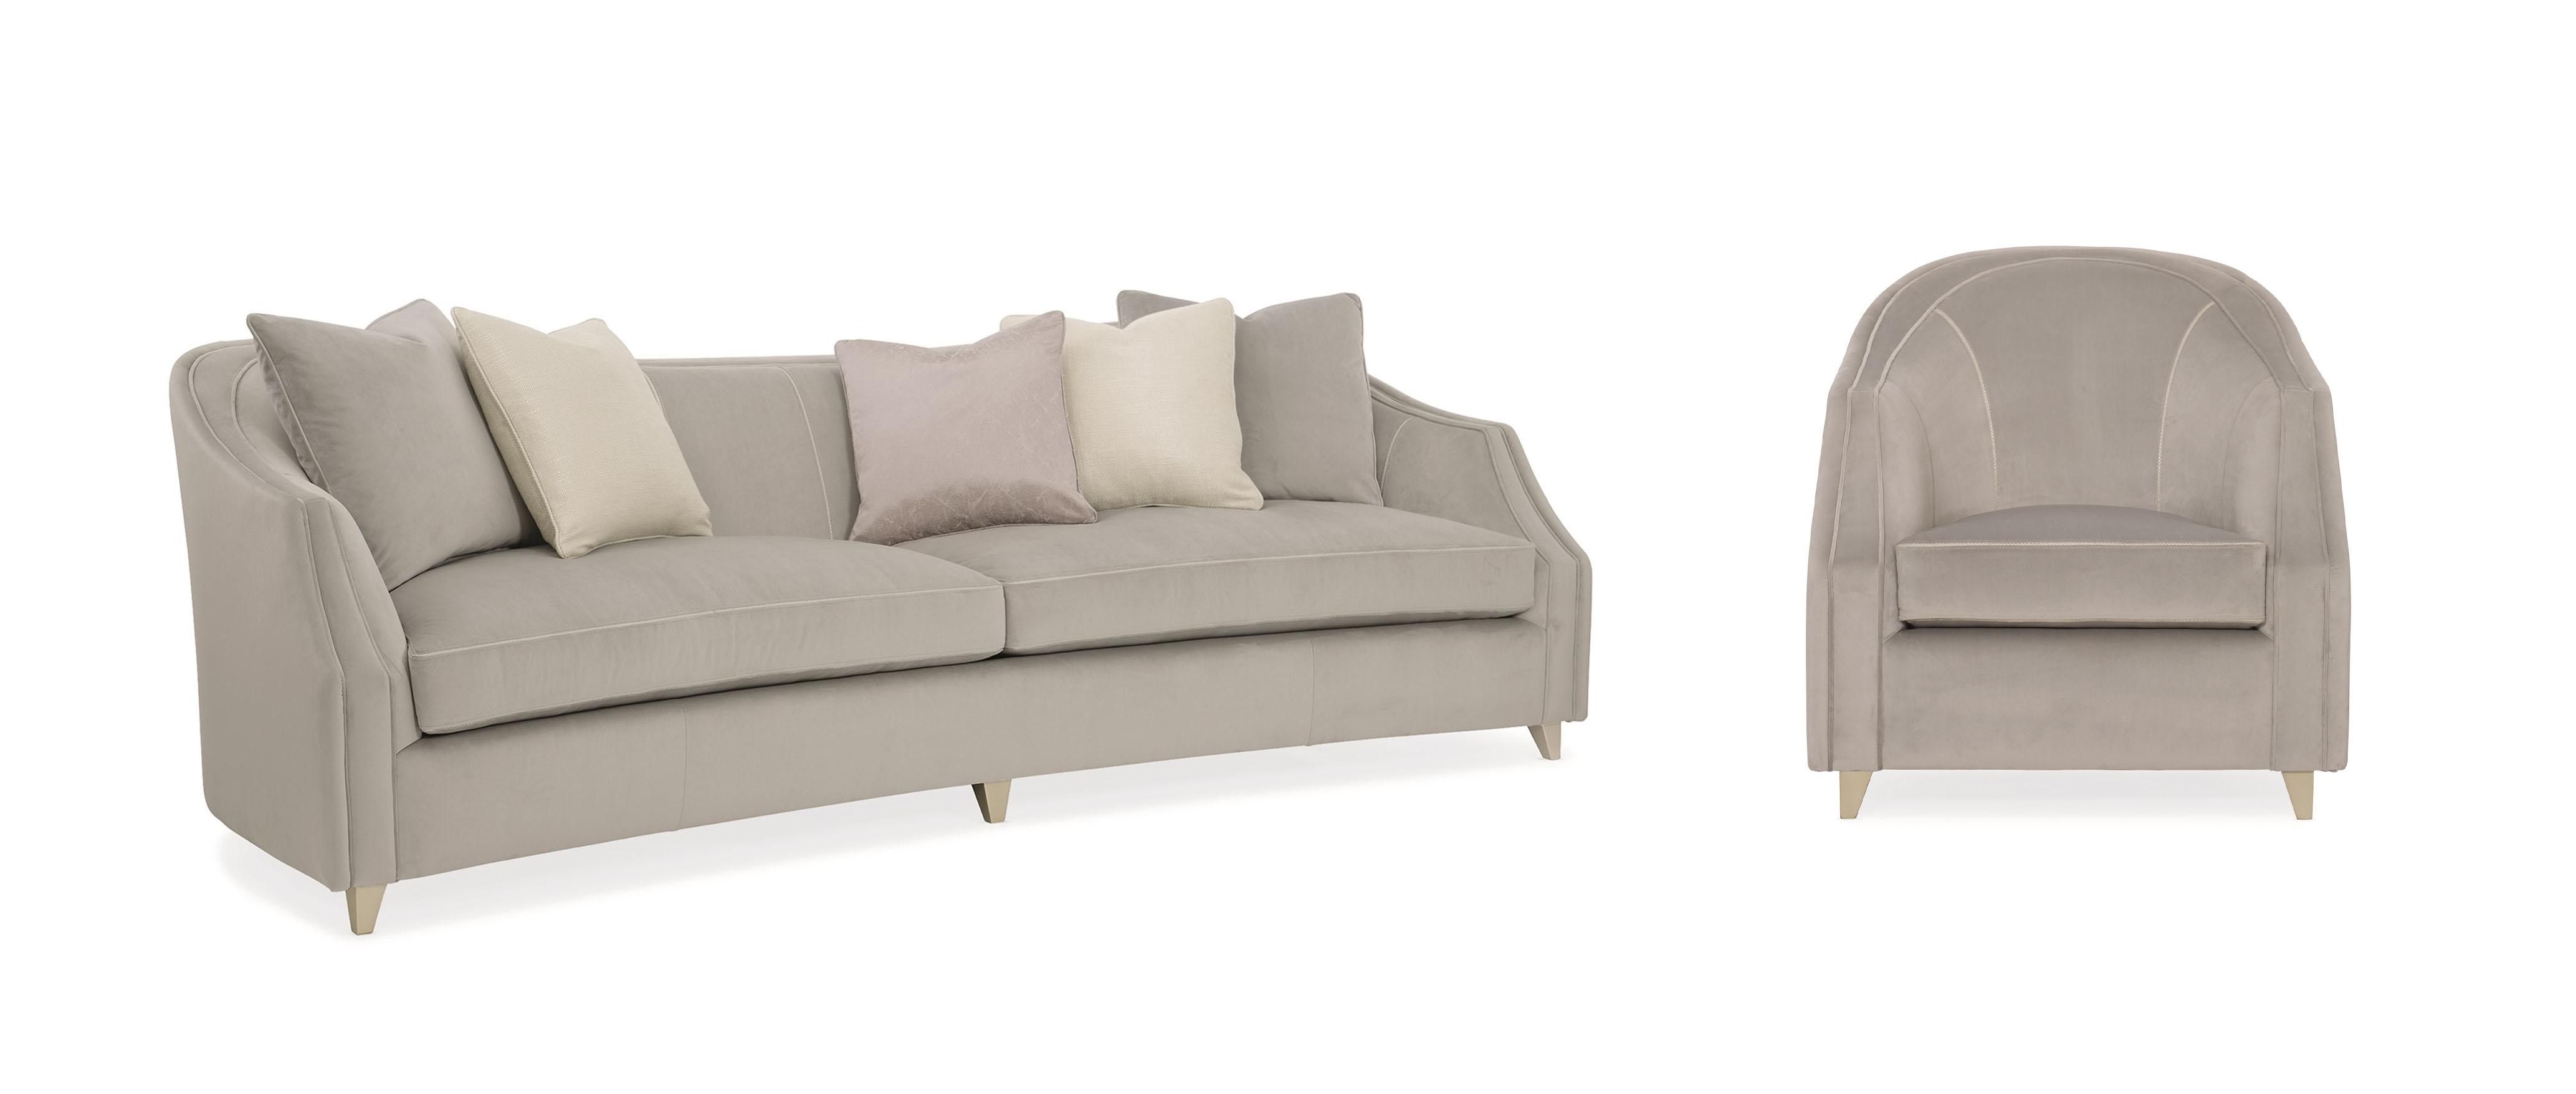 Contemporary Sofa and Chair SEAMS TO ME UPH-SOFFUL-49B-Set-2 in Gray Velvet